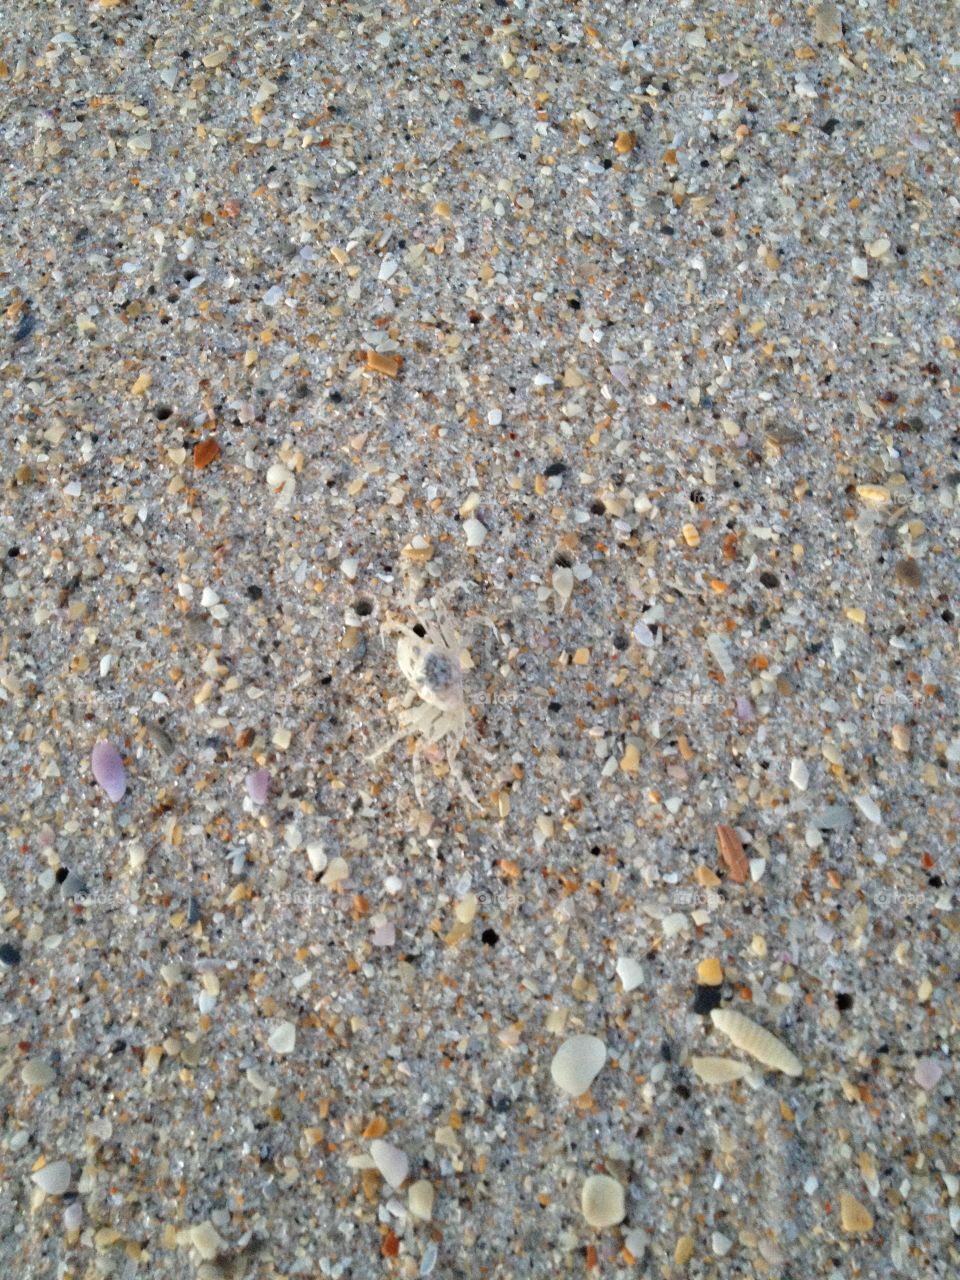 Hidden Ghost Crab on the Beach. I almost stepped on this little guy...